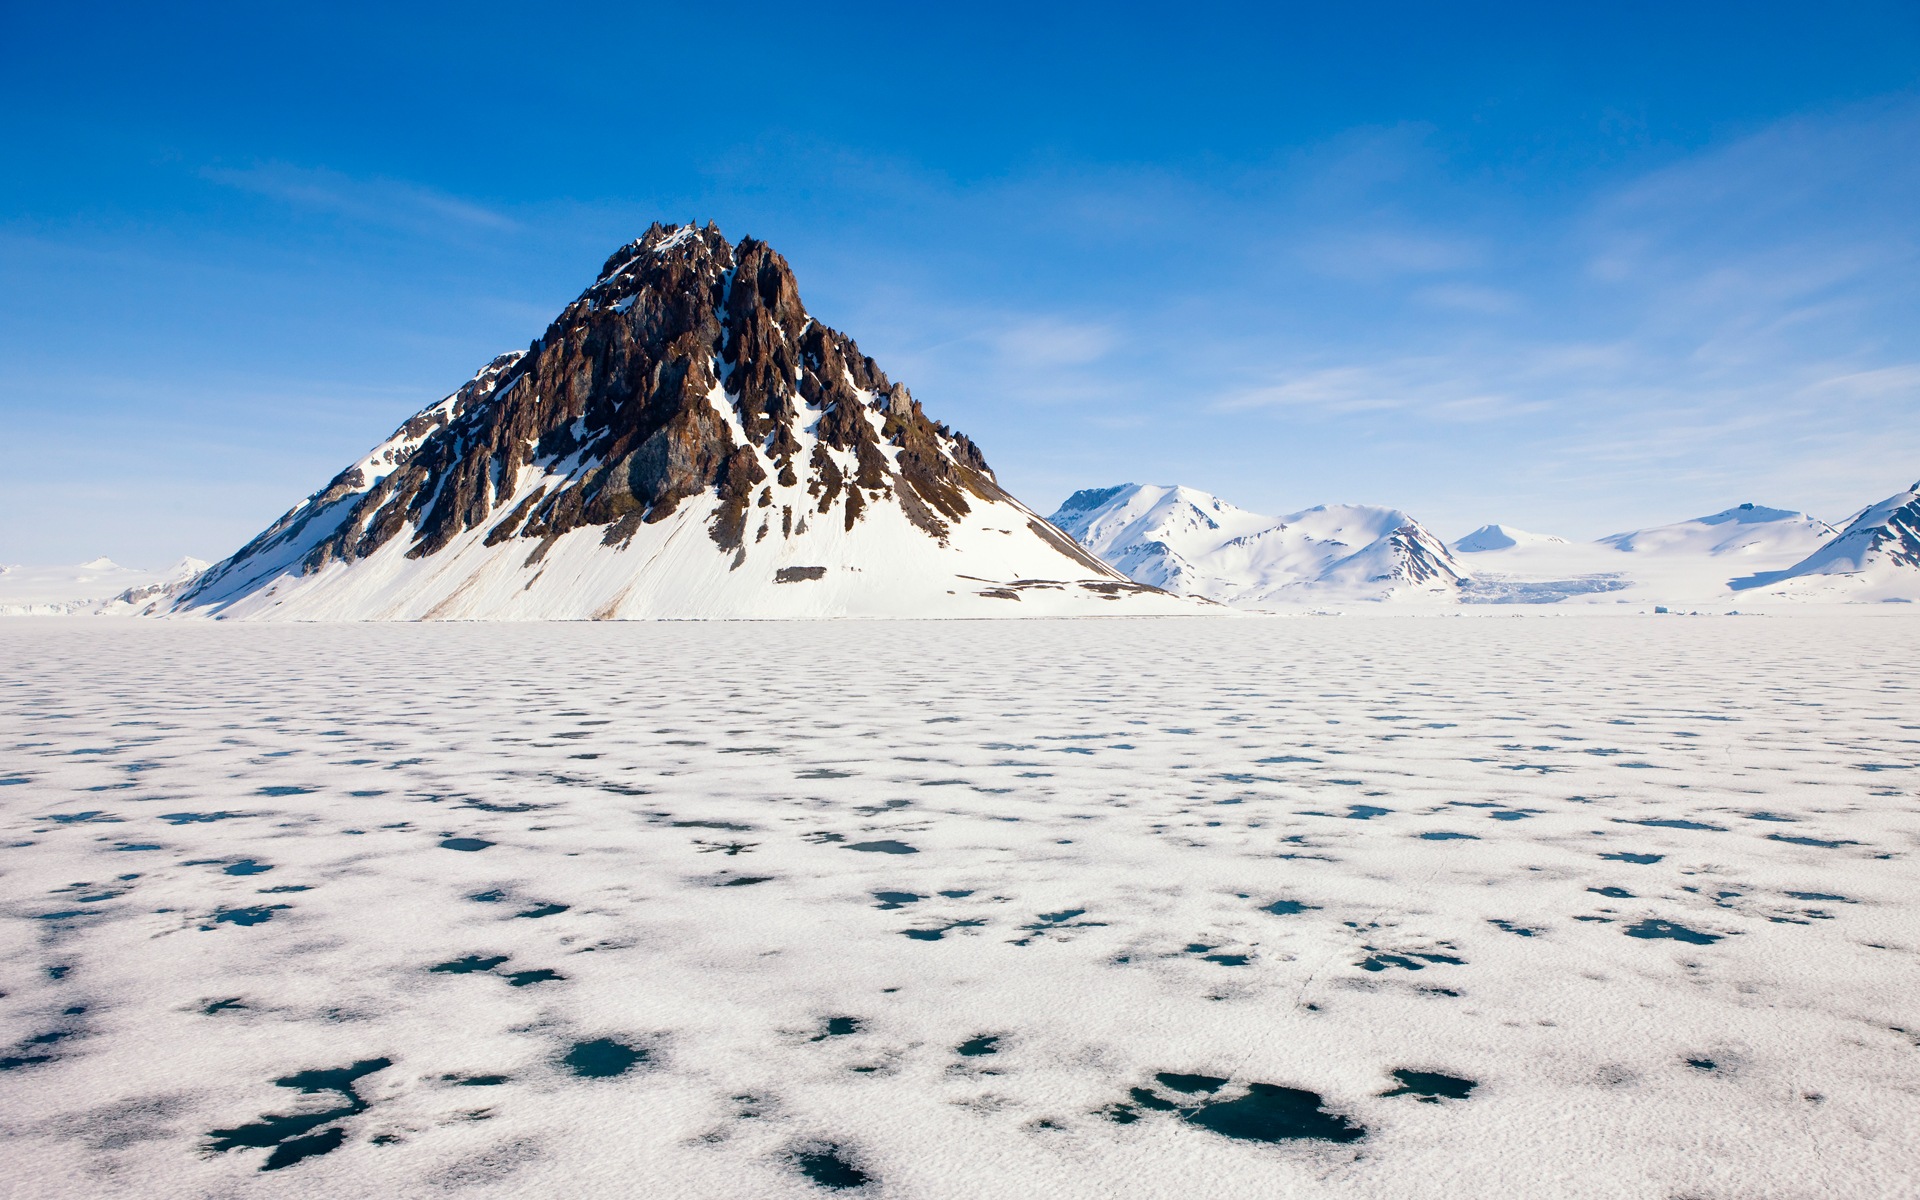 Windows 8 Wallpapers: Arctic, the nature ecological landscape, arctic animals #1 - 1920x1200